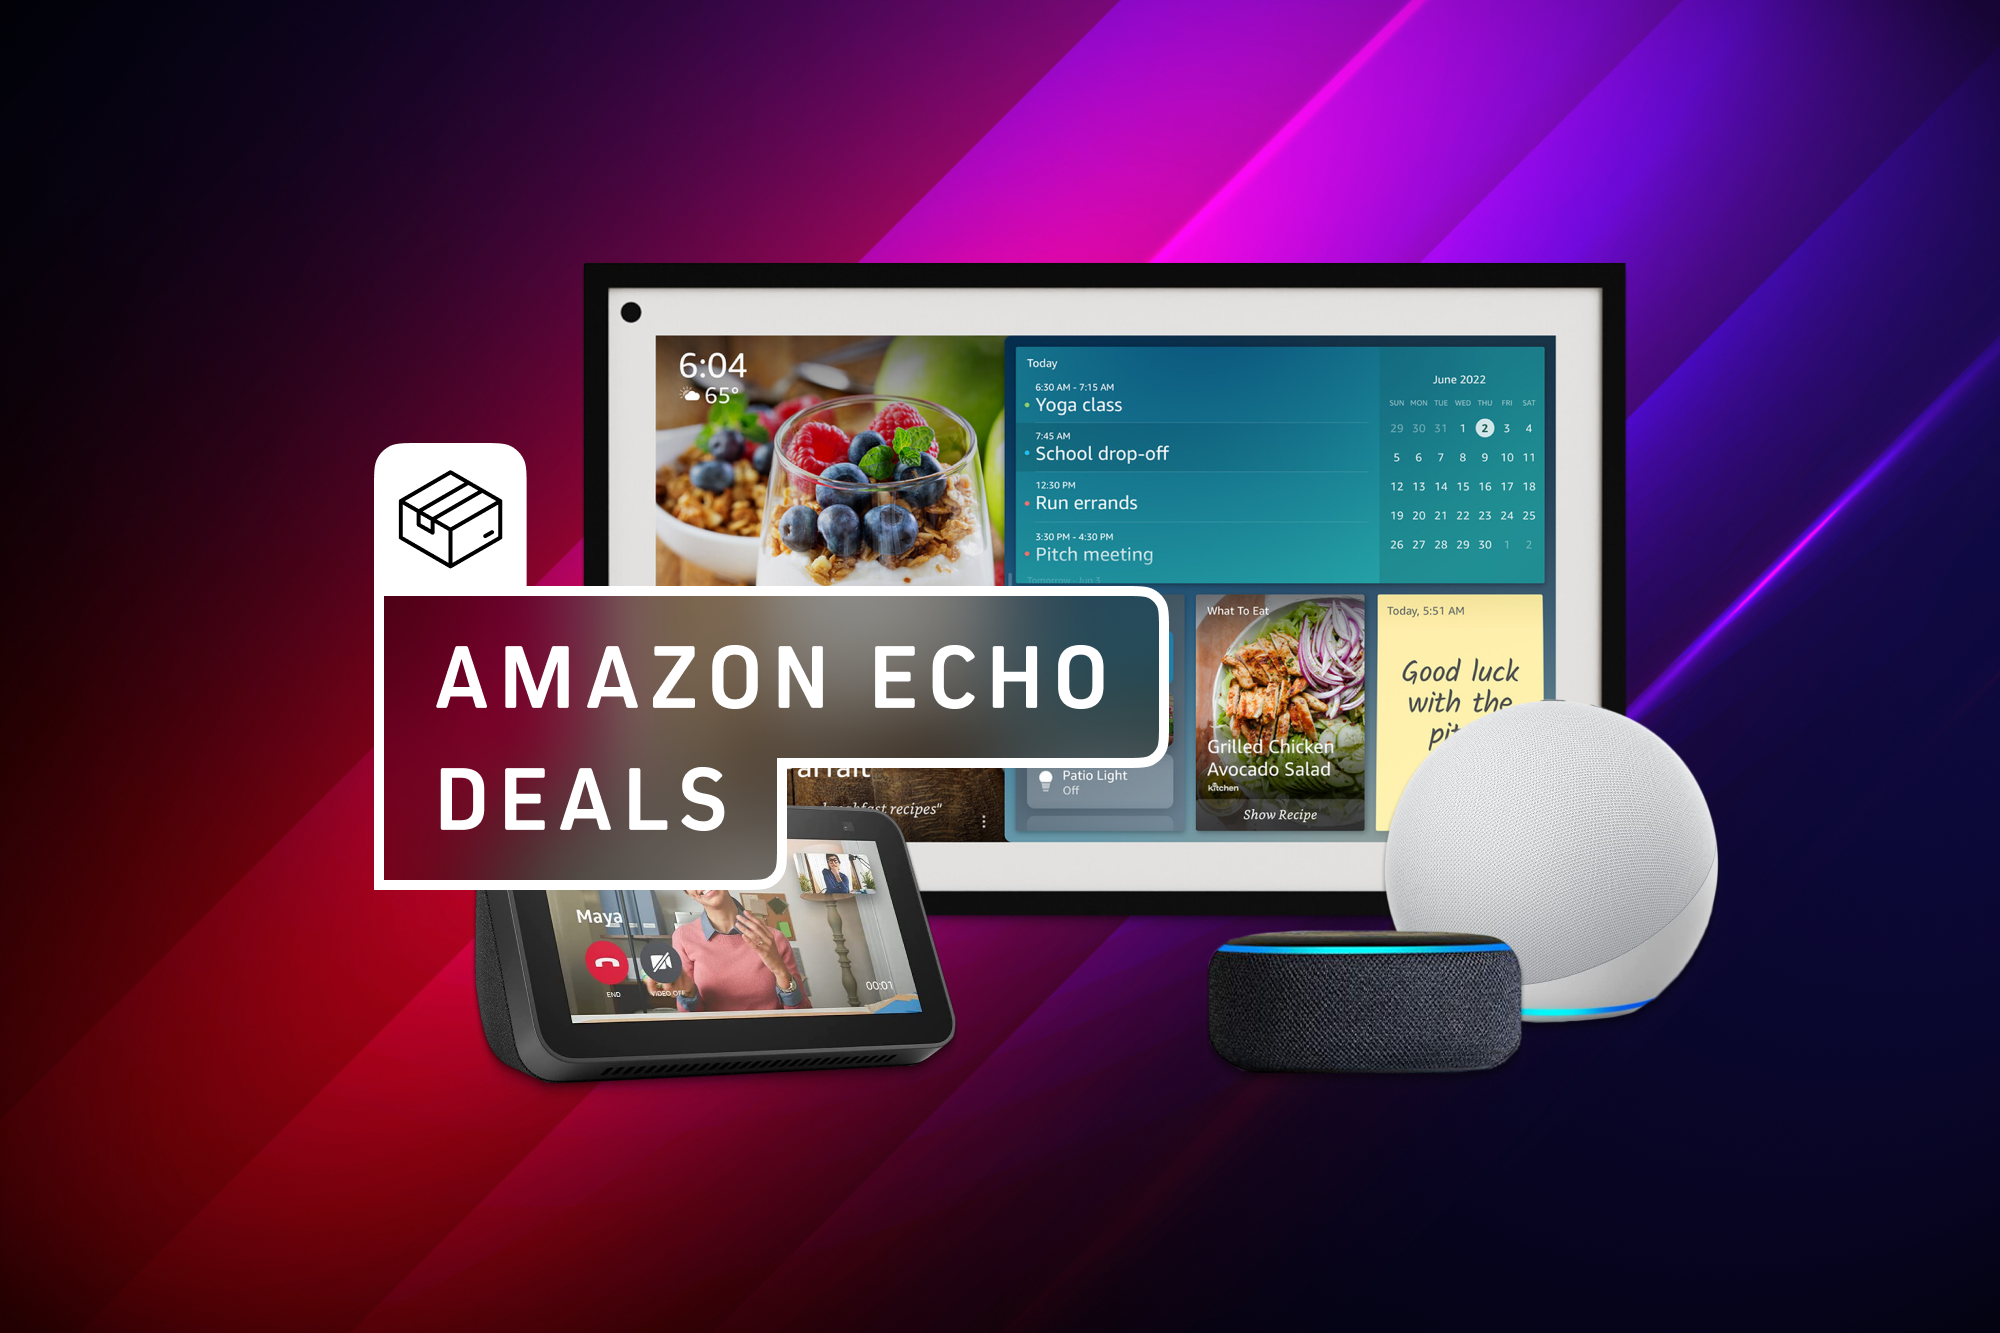 5 Early Prime Day Deals To Jump On